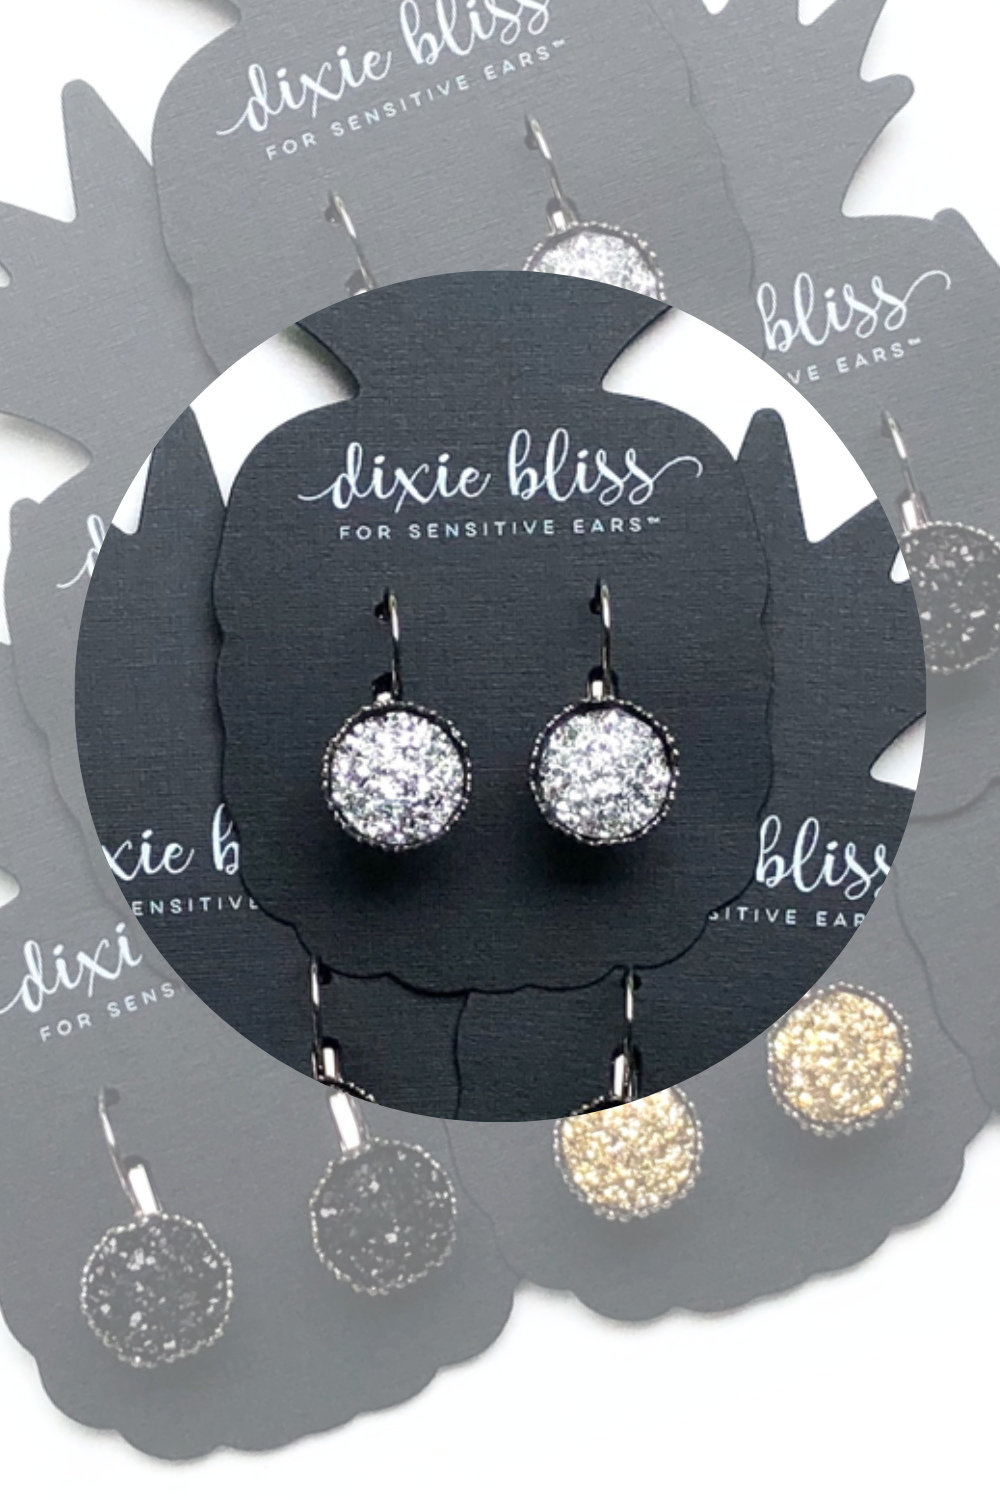 Dixie Bliss Earrings: Perfect Lever Backs In Gunmetal, Silver, Gold, Black. All are Hypoallergenic made in the USA woman-owned company druzy shiny diamond-like sparkle and shine safe & made for sensitive ears